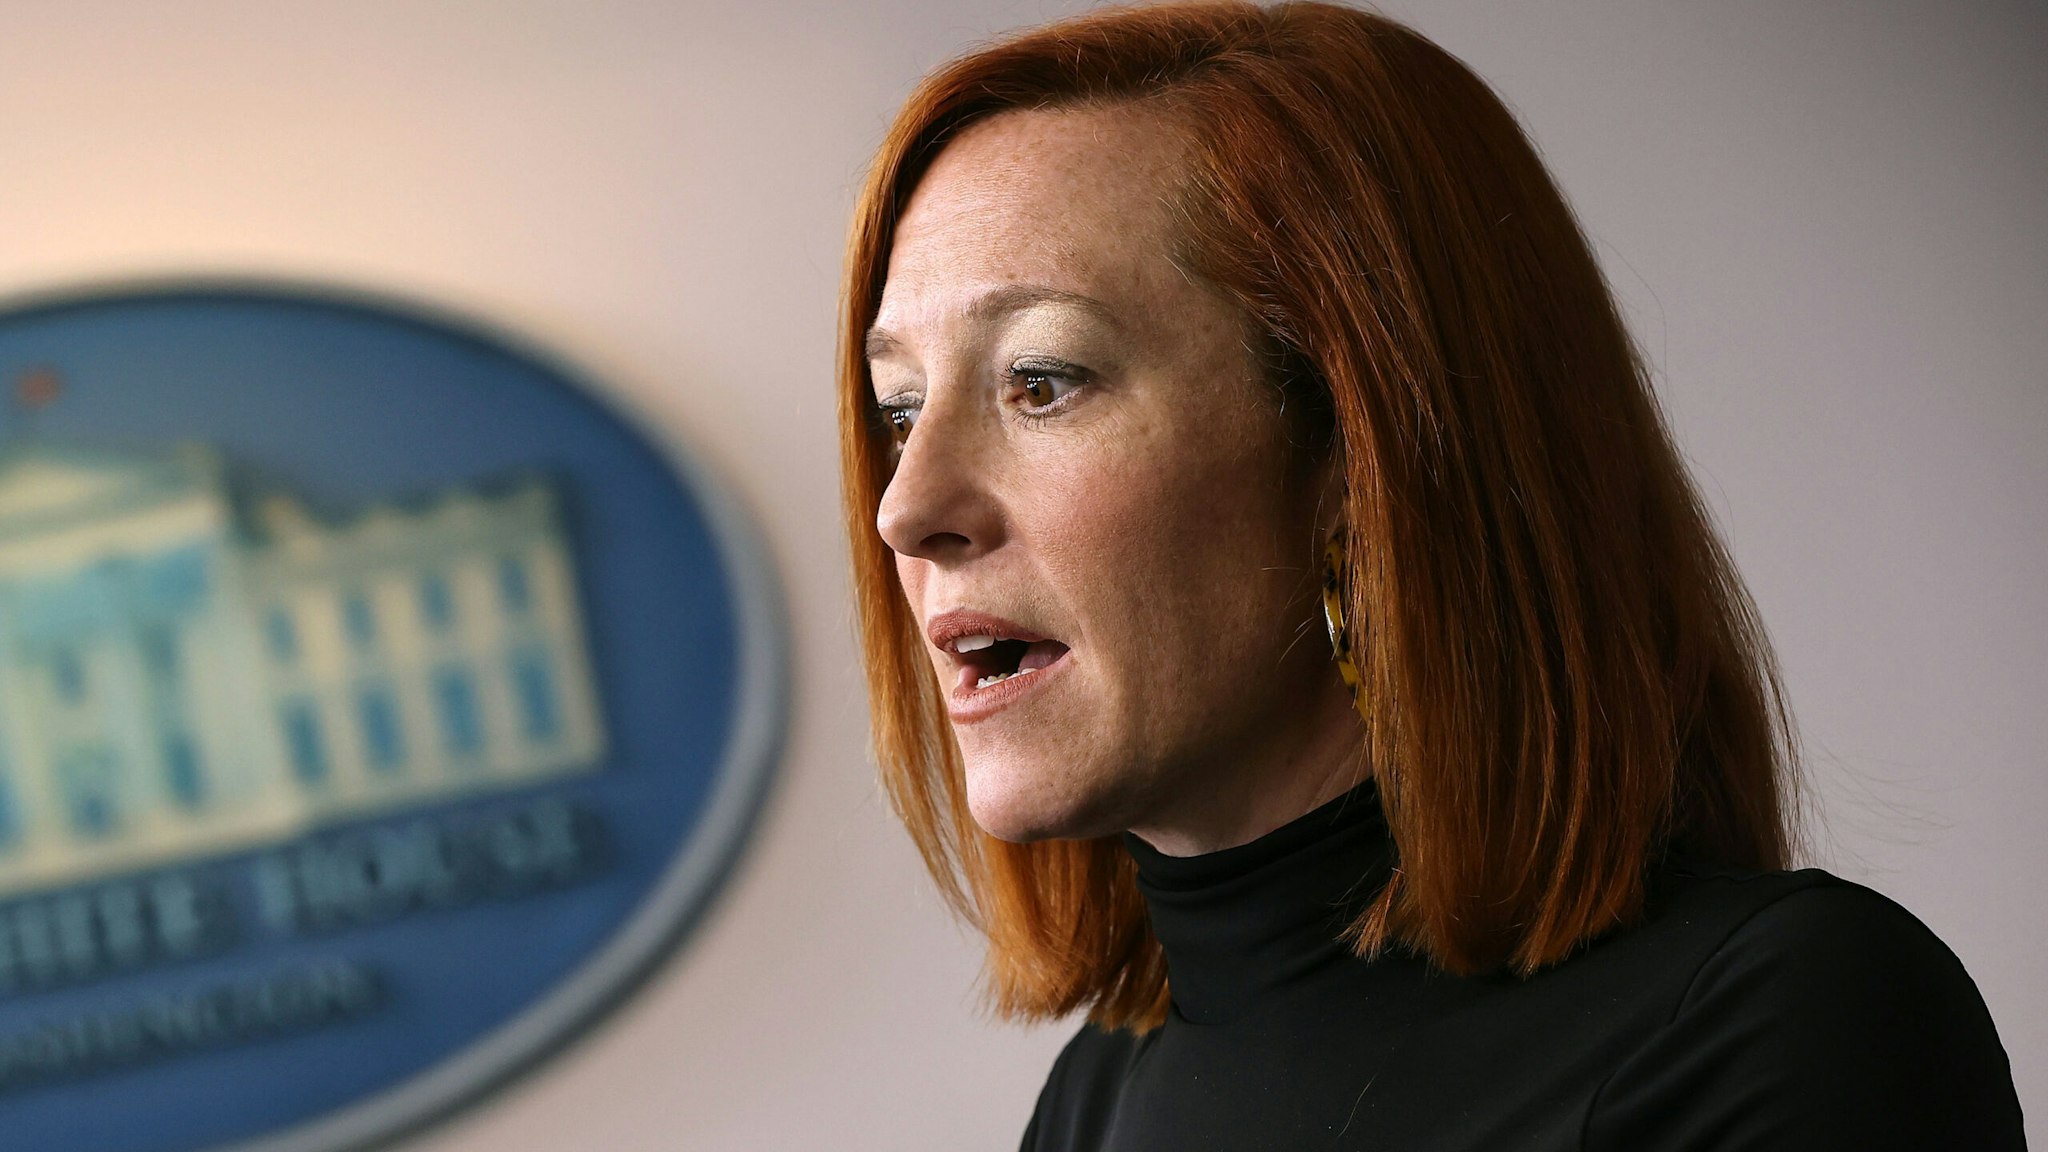 WASHINGTON, DC - FEBRUARY 03: White House Press Secretary Jen Psaki talks to reporters during a news conference in the Brady Press Briefing Room at the White House on February 03, 2021 in Washington, DC. After appearing to slight the U.S. Space Force, Psaki invited representatives of the newest military branch to come to the White House to brief reporters.